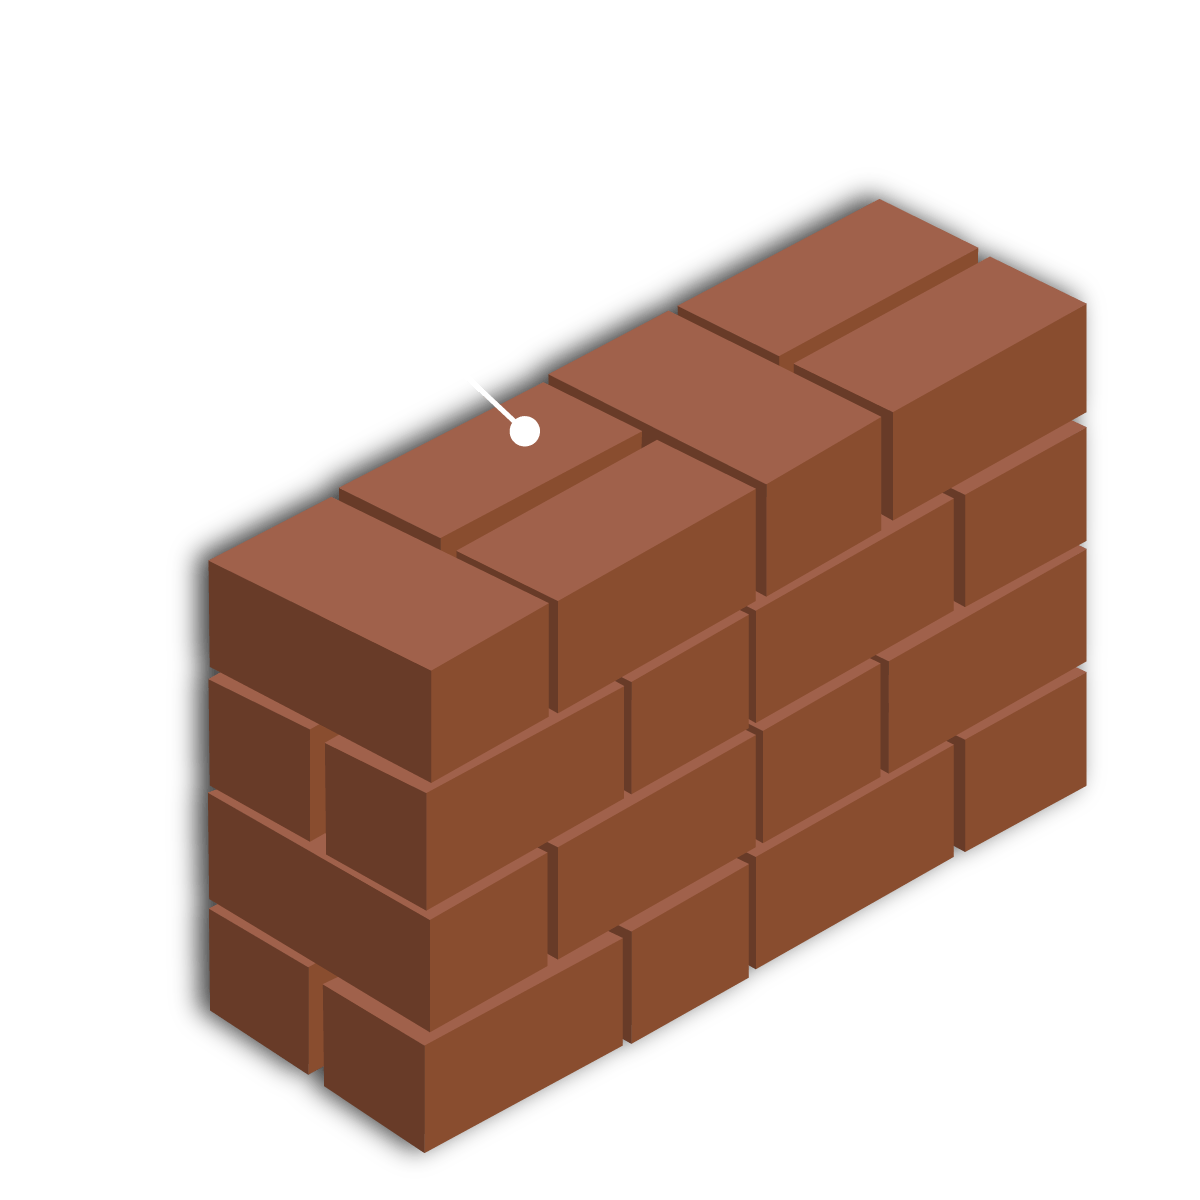 Diagram showing features of a Solid Wall brick pattern